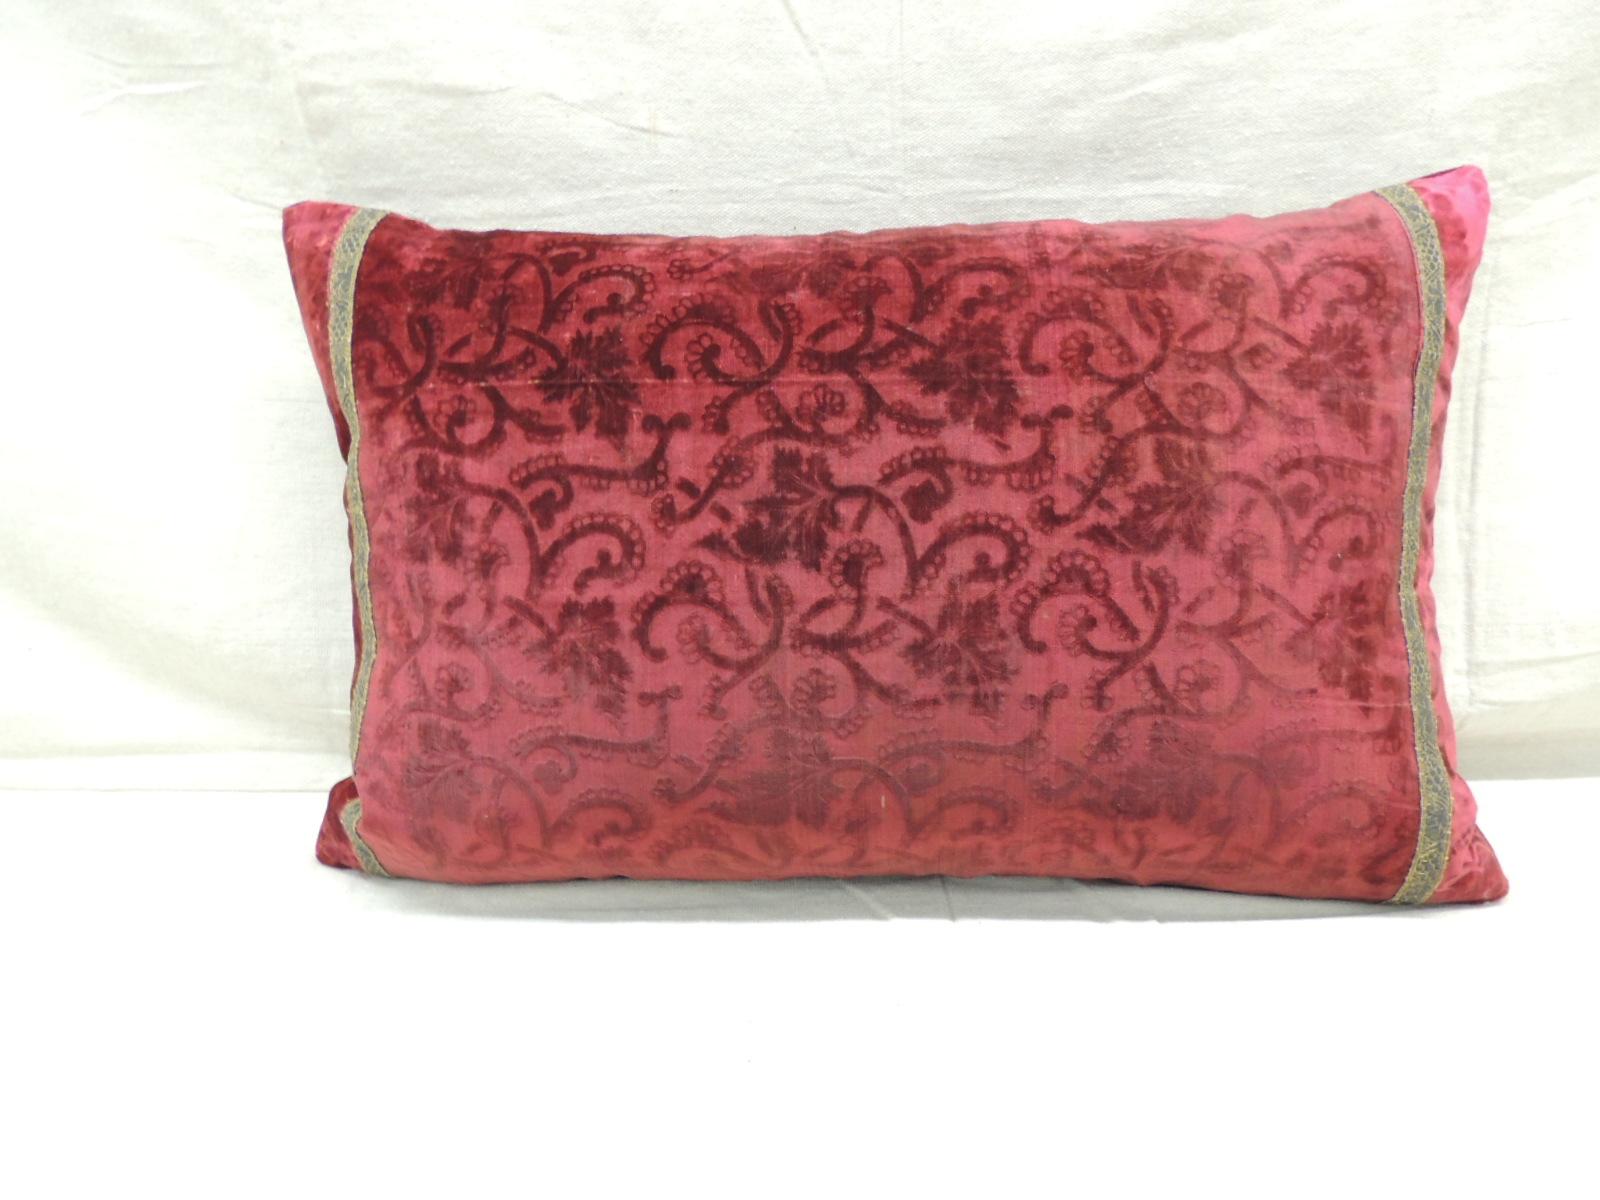 Hand-Crafted Antique Red Silk Velvet Applique Bolster Decorative Pillow For Sale